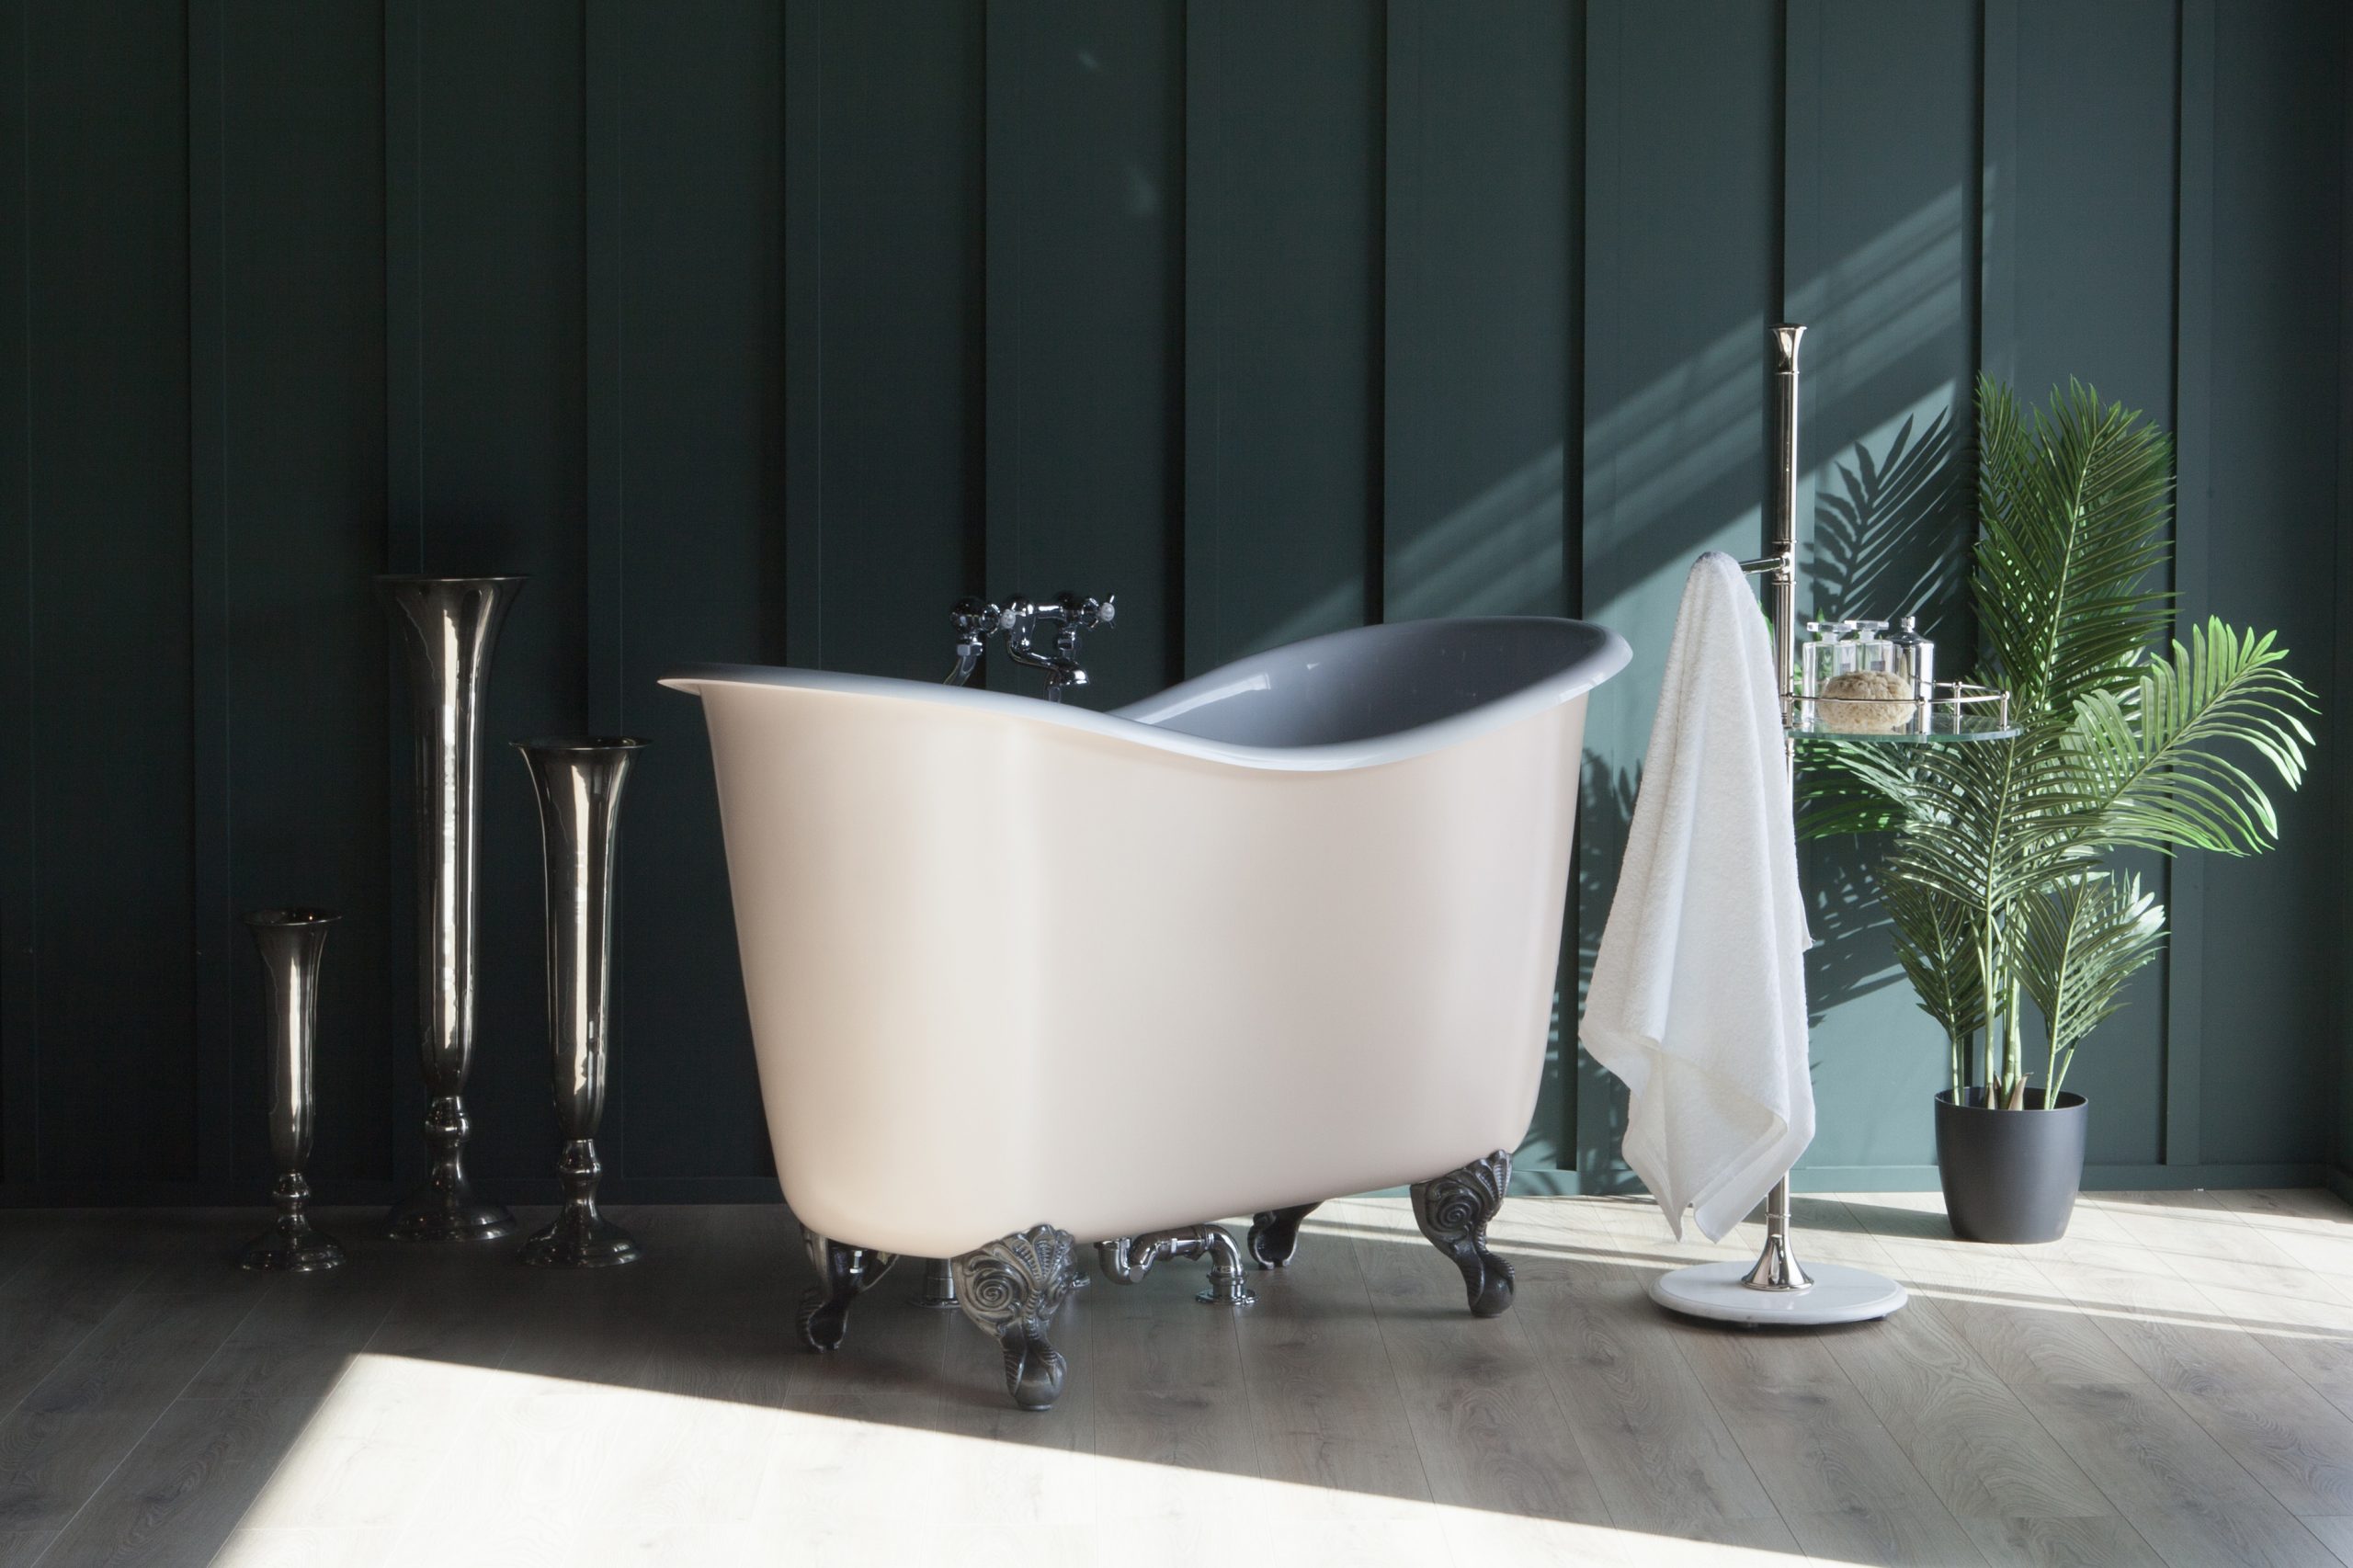 Tubby Too double ended bath slightly angled front on view. Bath shown with painted exterior and burnished Iron feet.